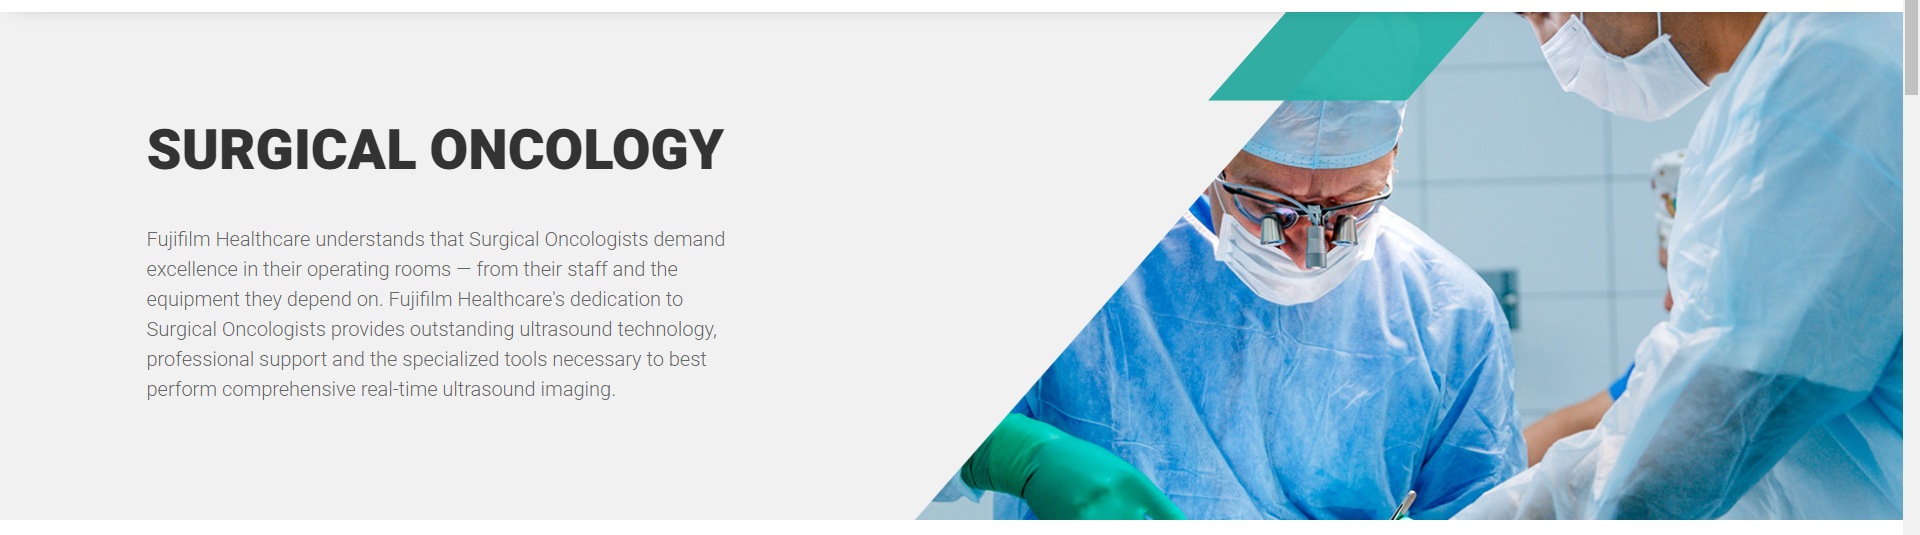 Surgical Oncology Banner